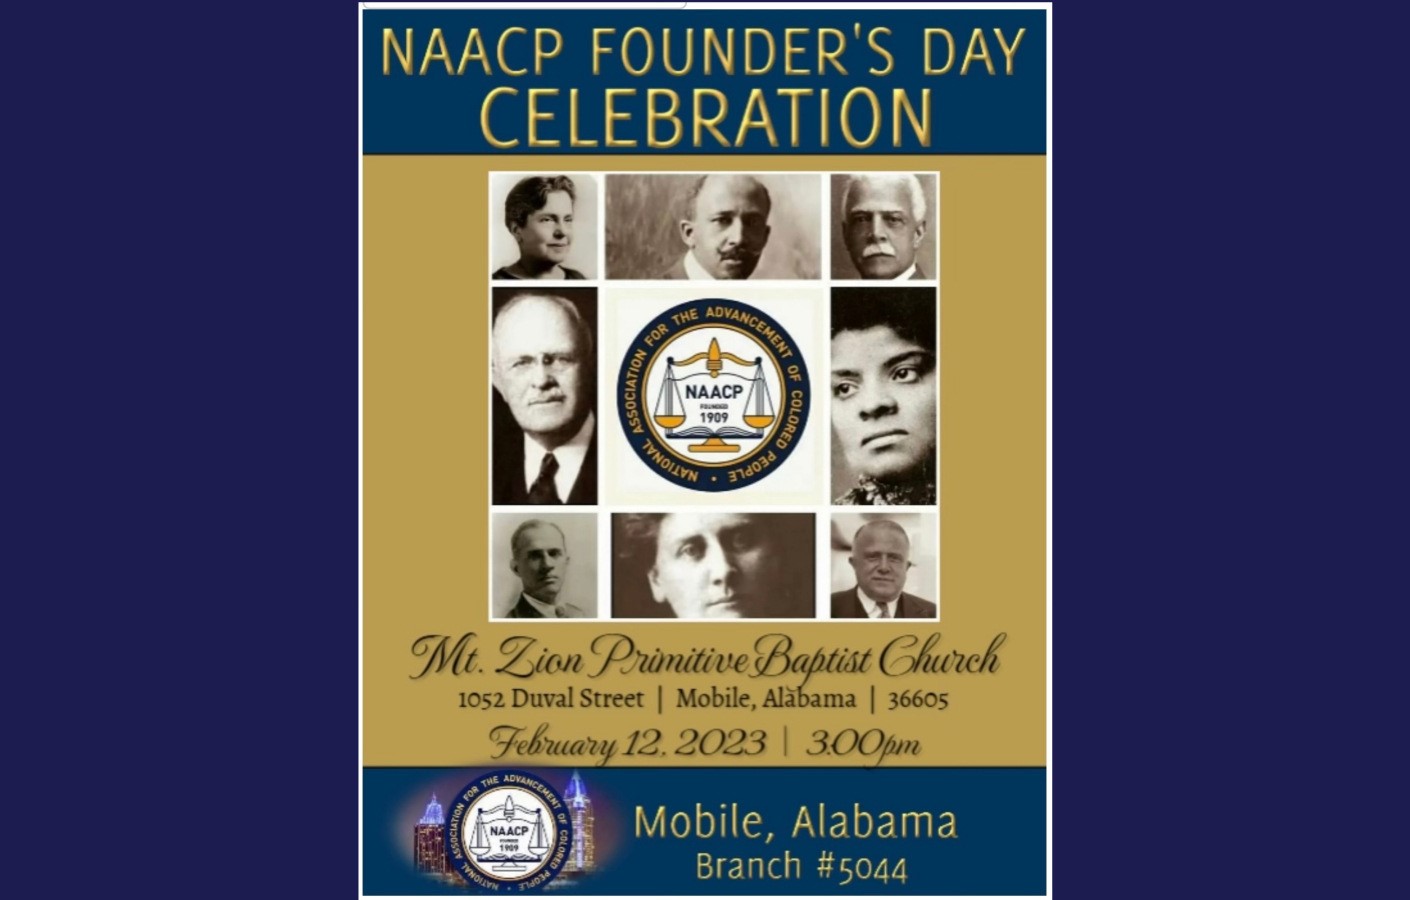 NAACP FOUNDER S DAY CELEBRATION